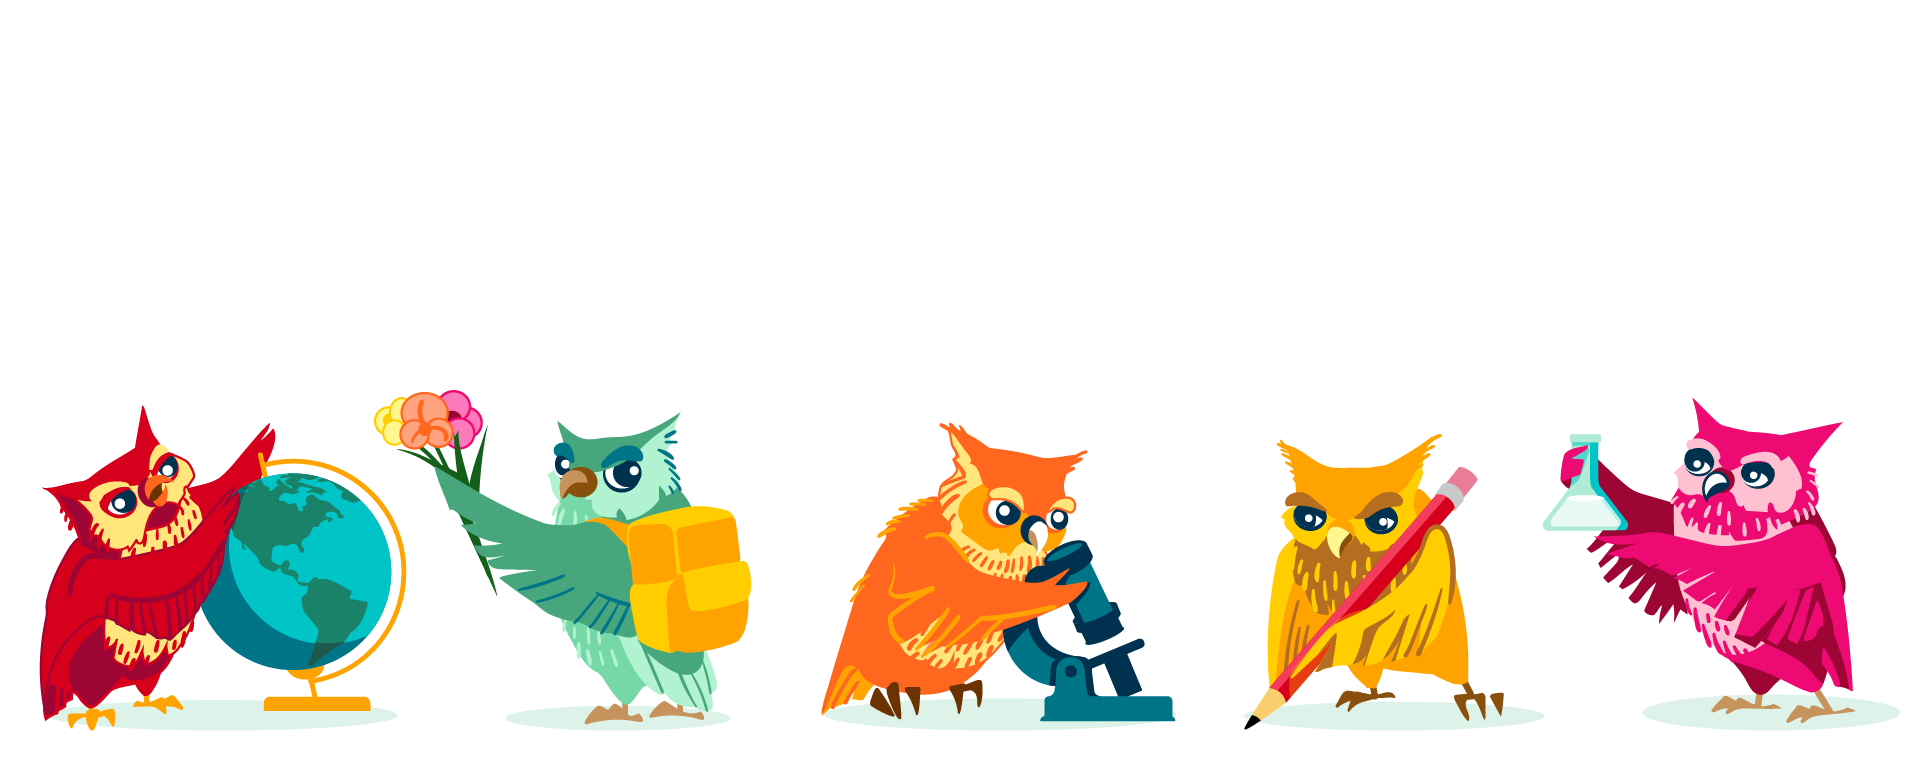 White background with 5 owls depicted engaging in various research activities